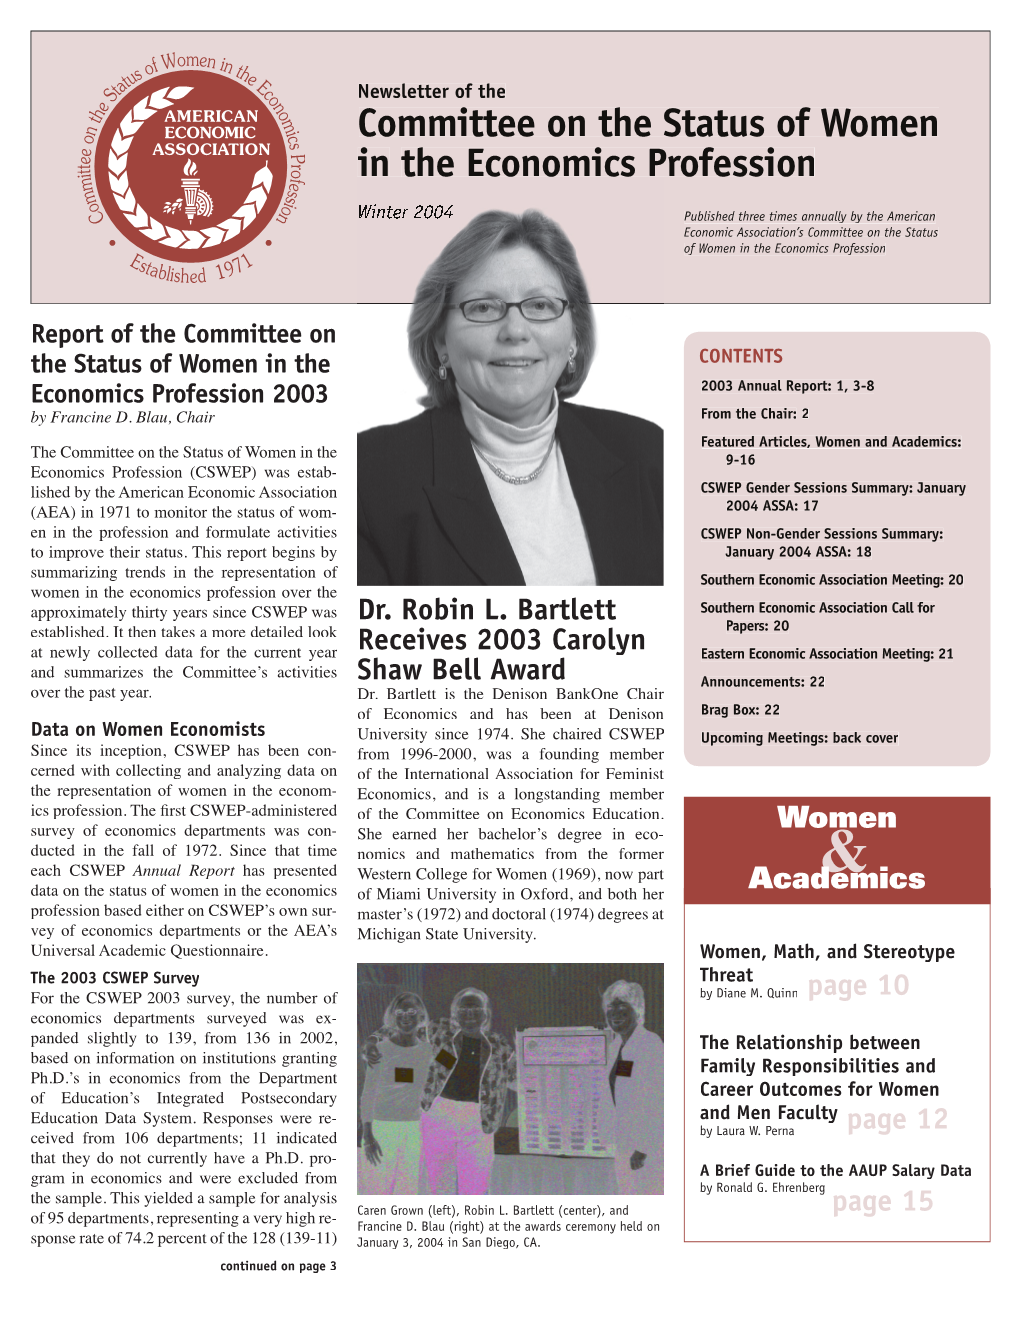 Committee on the Status of Women in the Economics Profession